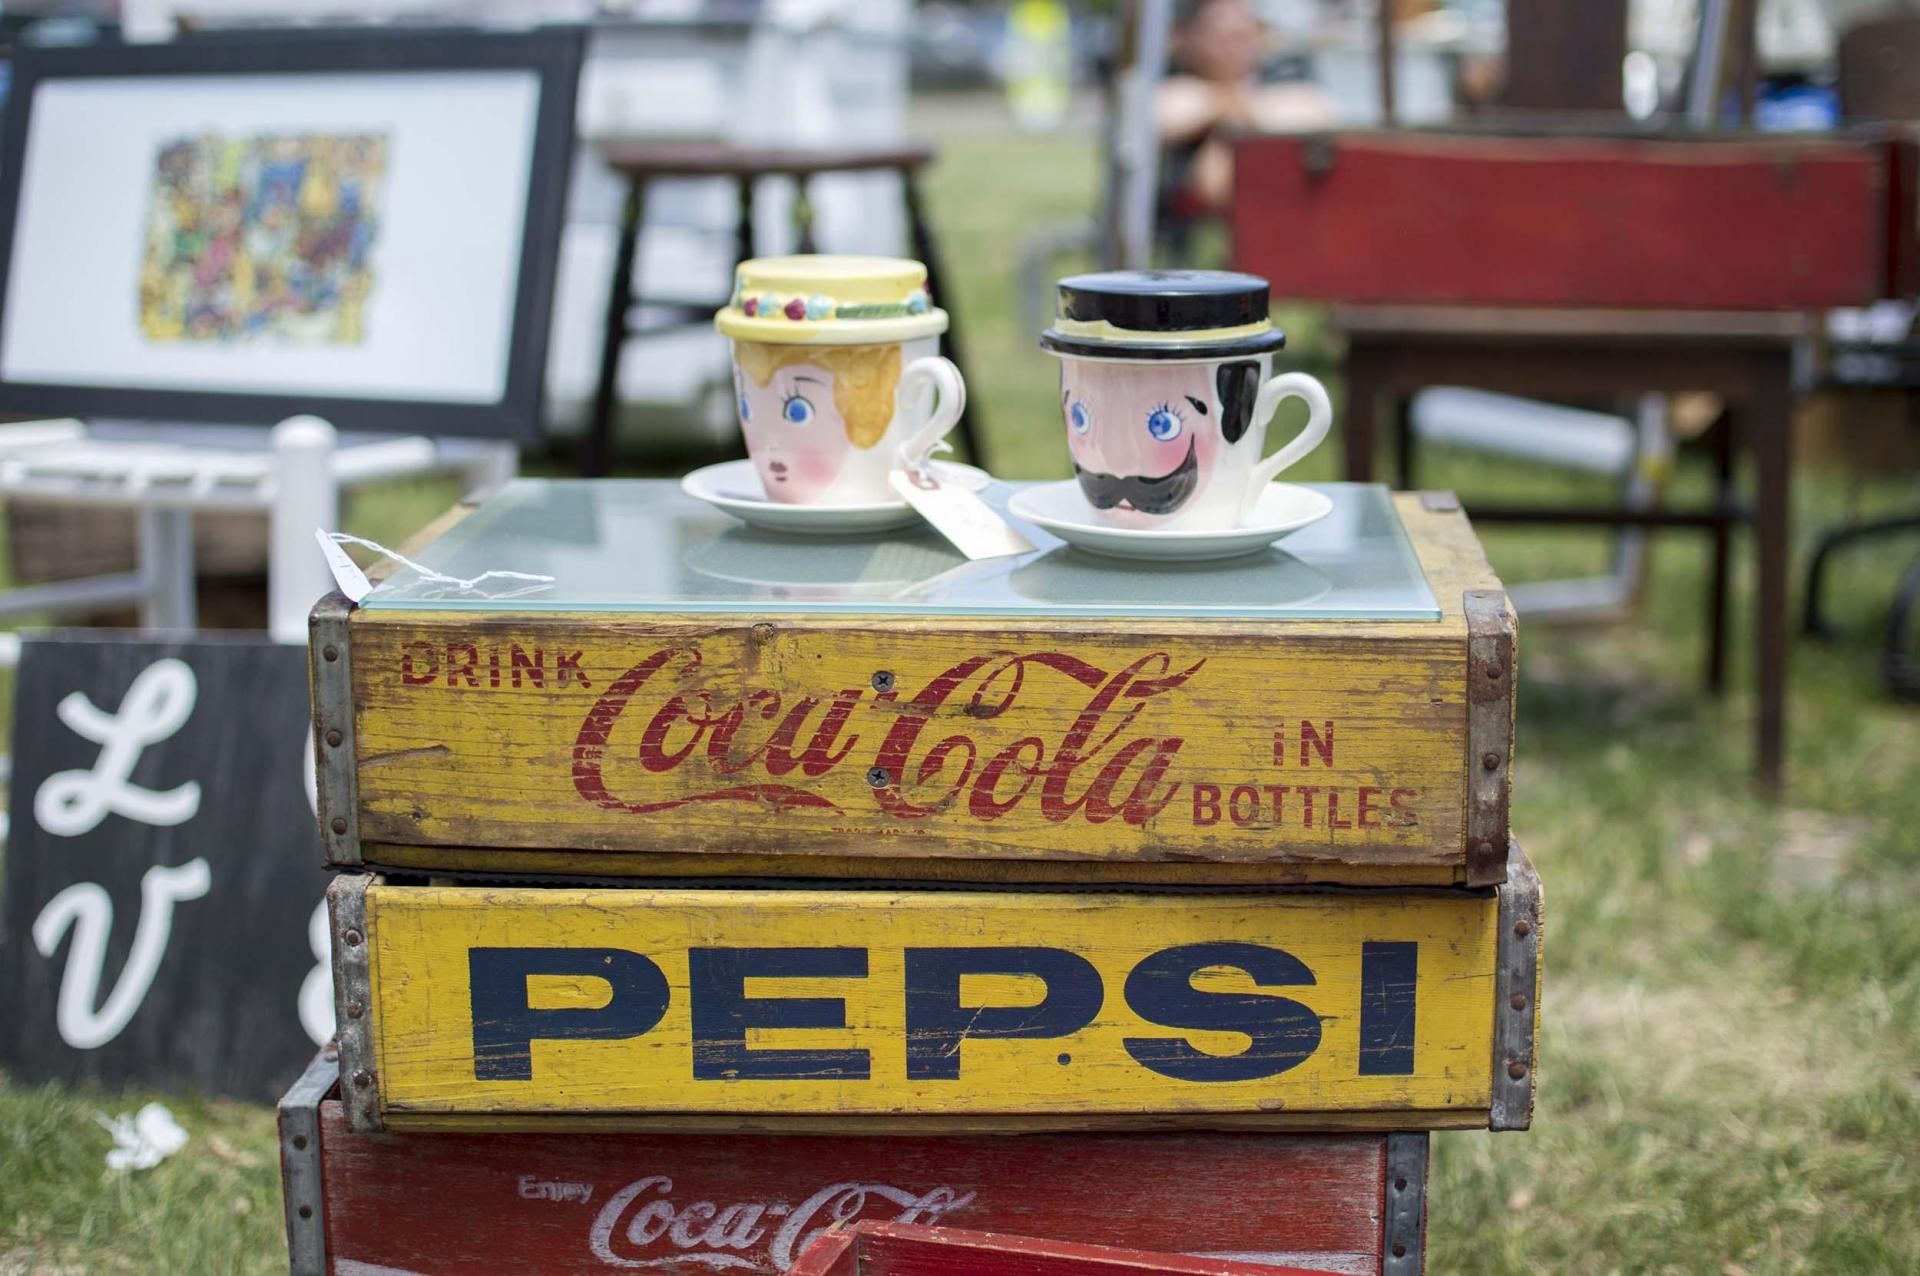 Antique coffee cups and soda crates.